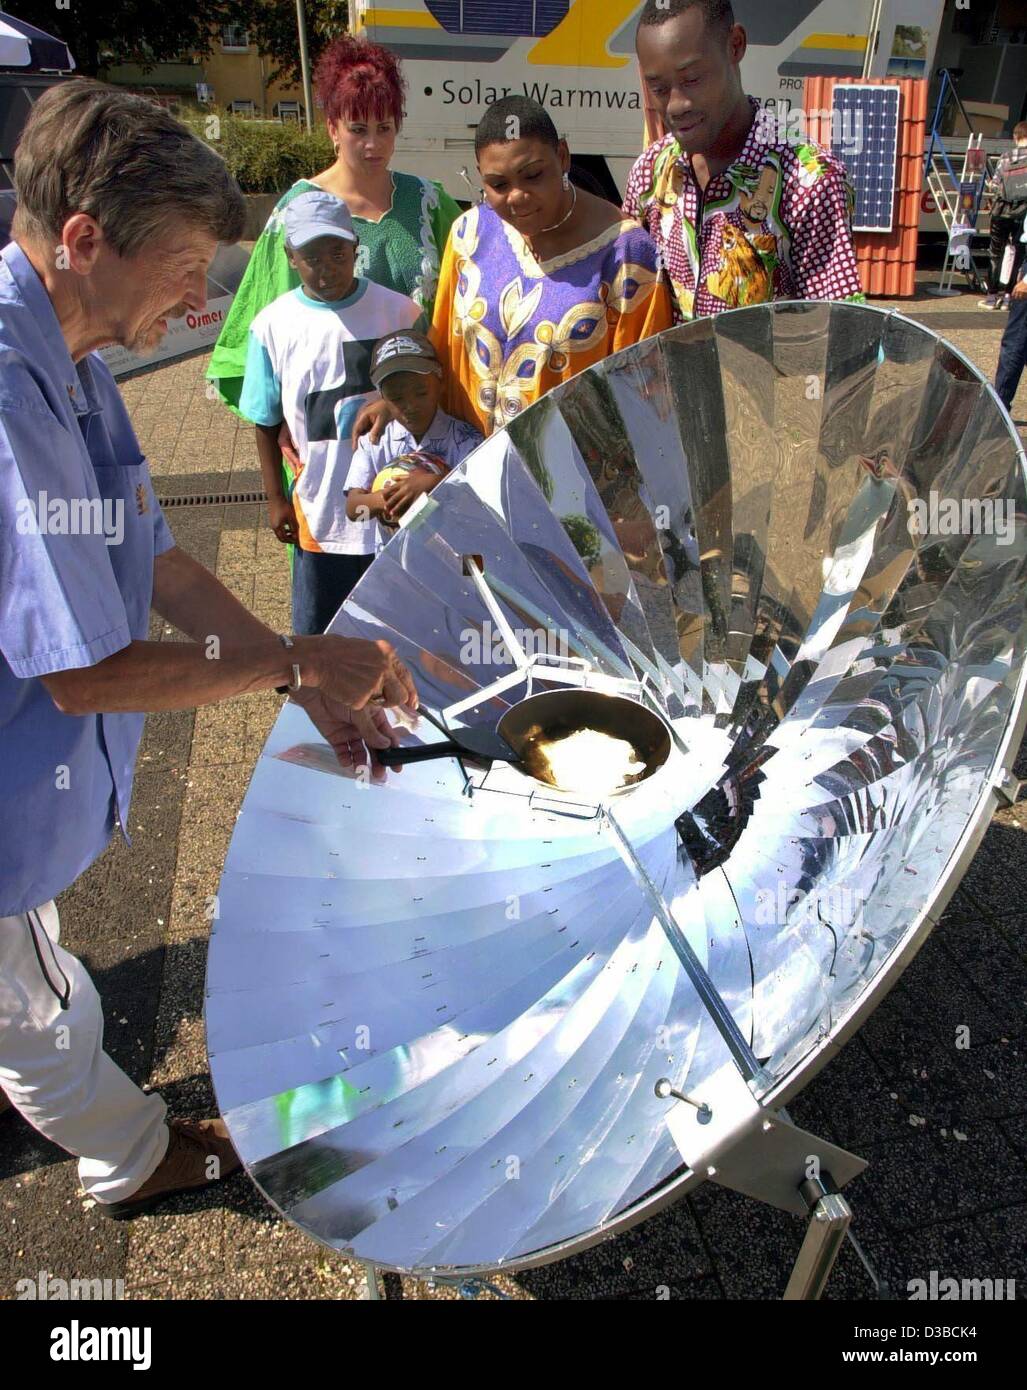 (dpa) - Dieter Zellweger (L) prepares a fried egg on a solar cooker on the Soltec trade fair in Hameln, Germany, 15 August 2002. A parabolic reflector in the shape of a satellite dish focuses the sunbeams on the frying pan. Rotary International and the German-Madagascan Club plan to introduce the so Stock Photo